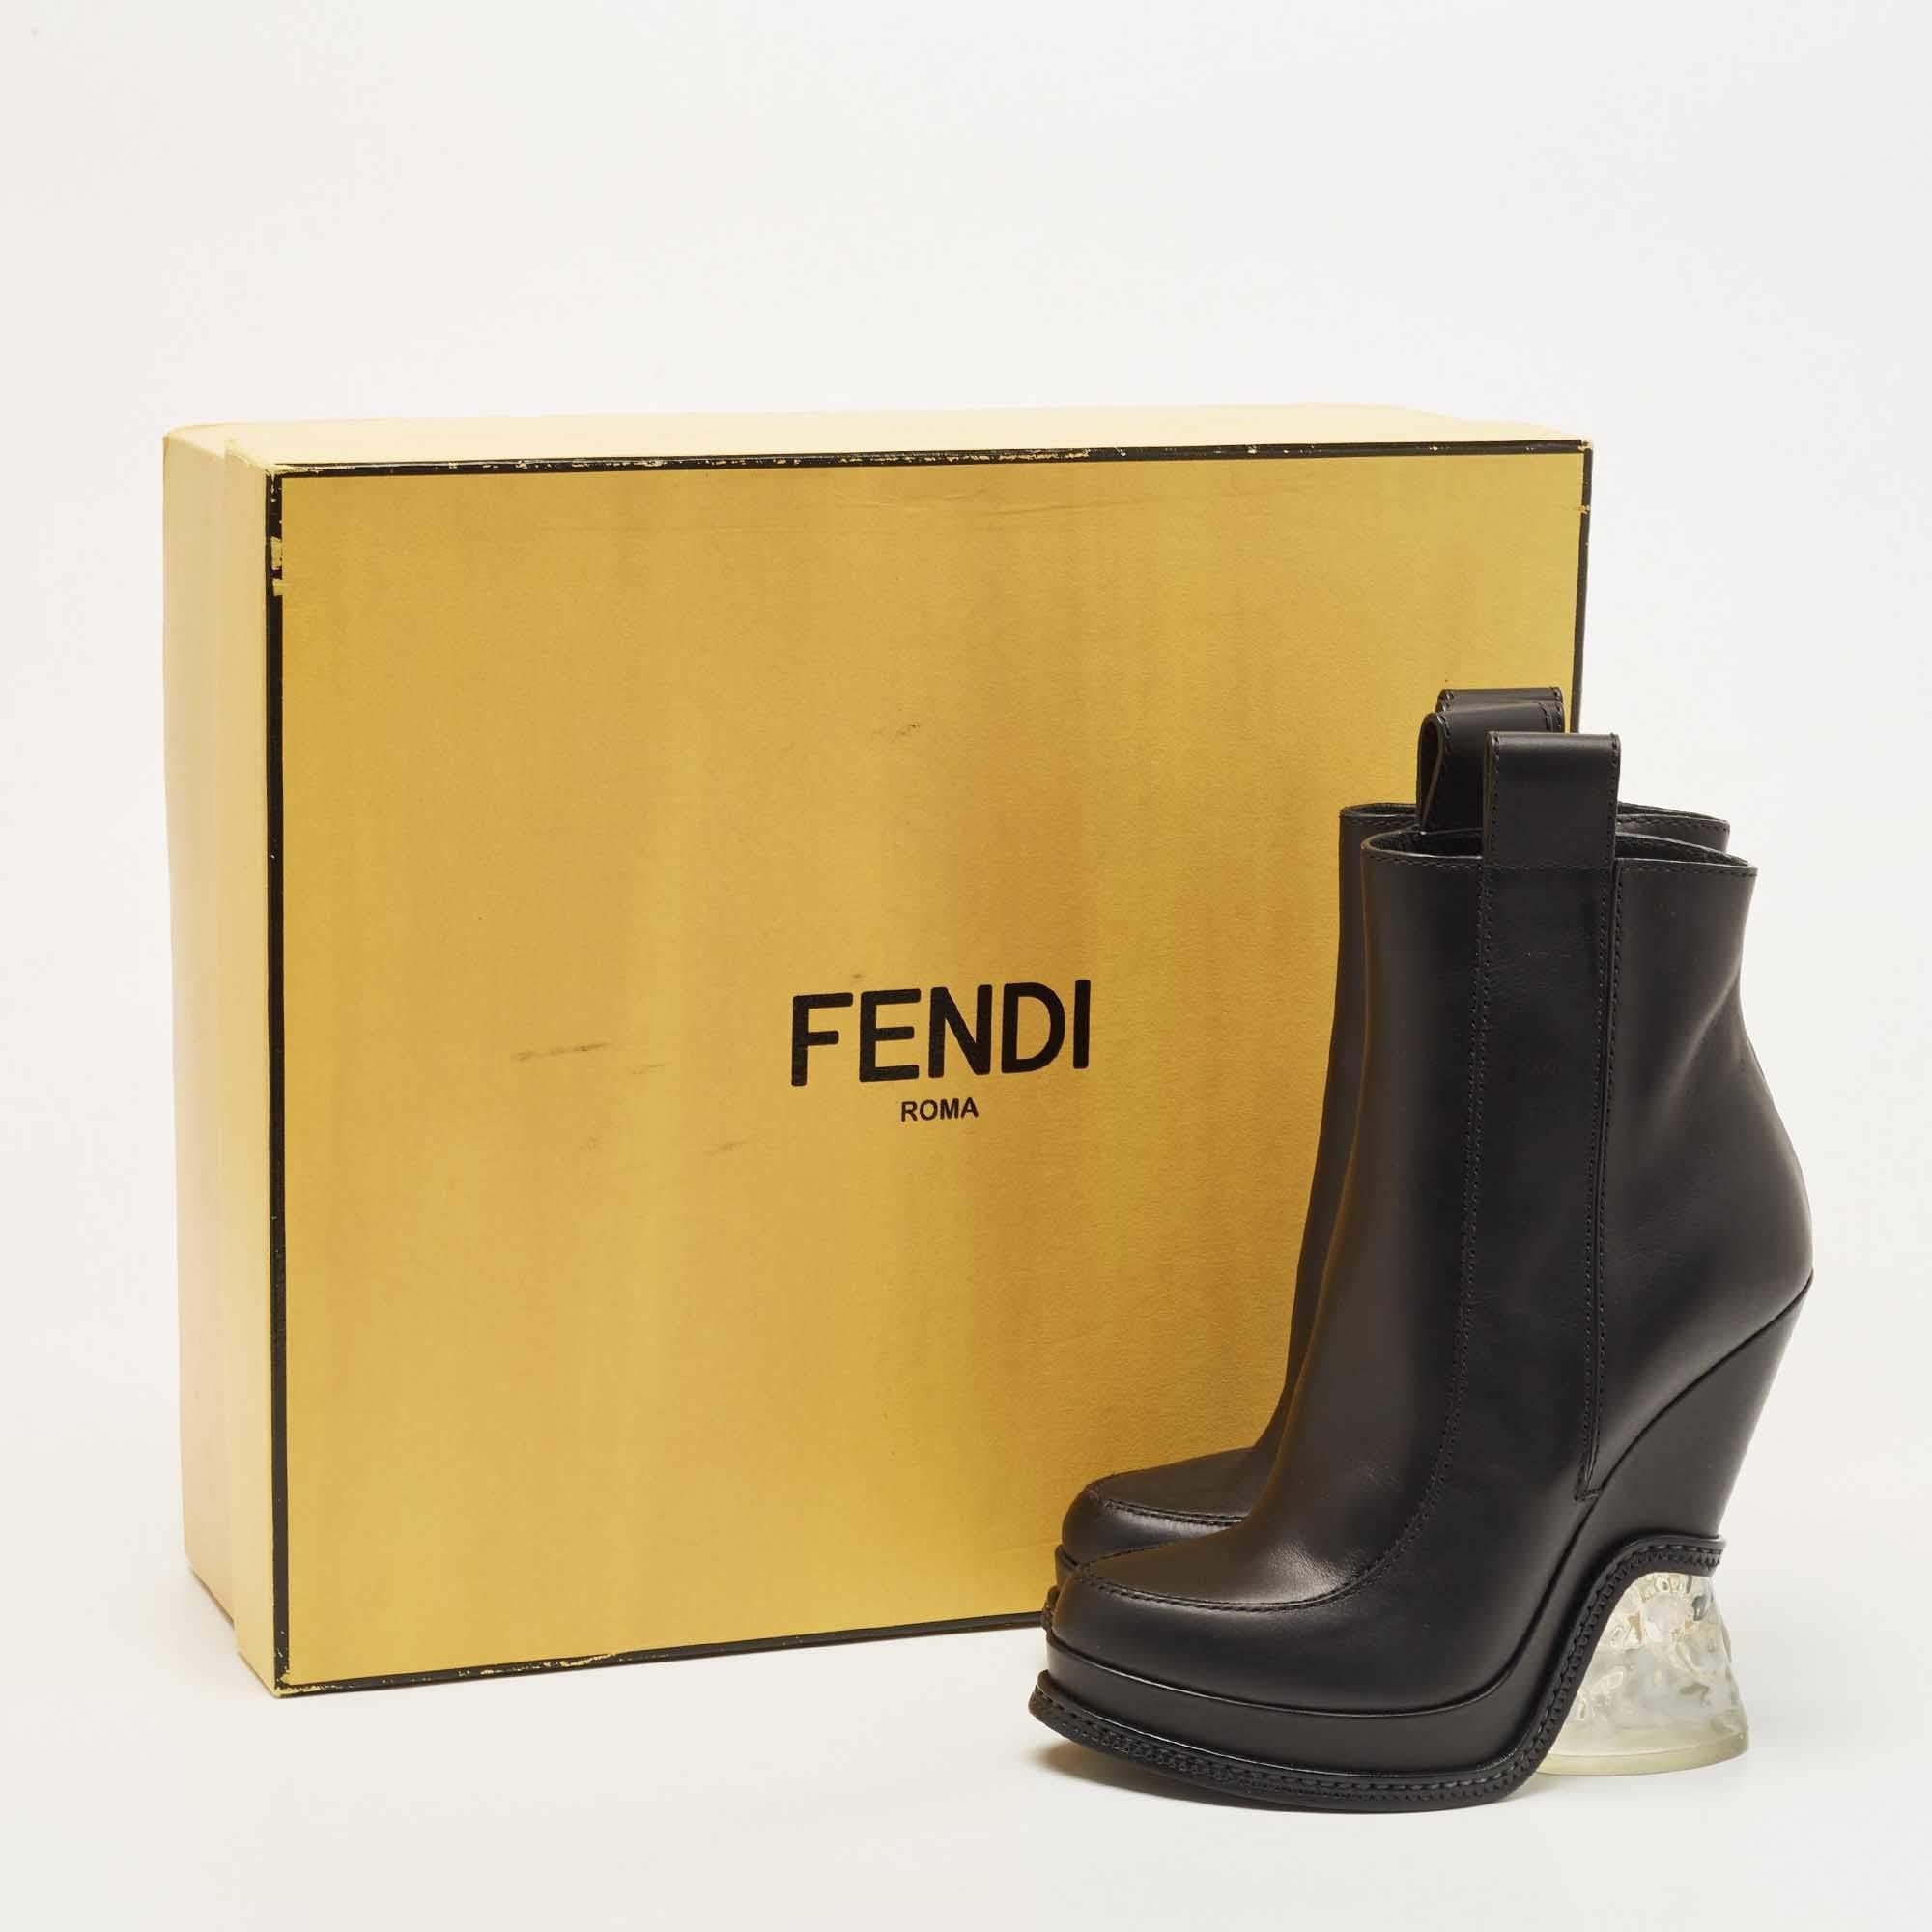 Fendi Black Leather Wedge Ankle Booties Size 36 5